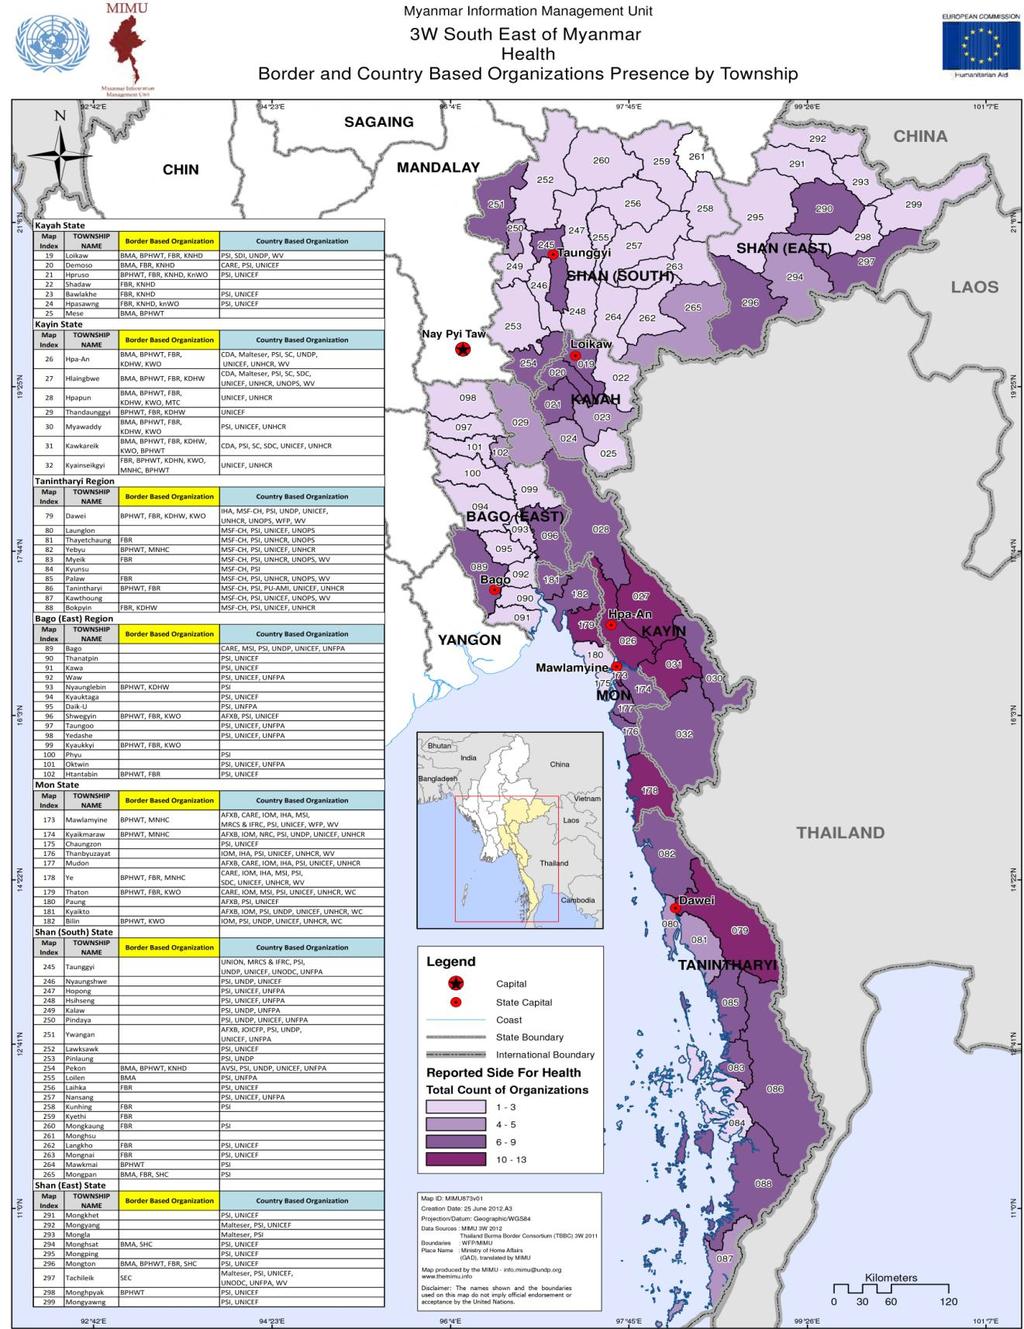 Annex 6 : MIMU 3W Map Southeast Myanmar (Border and